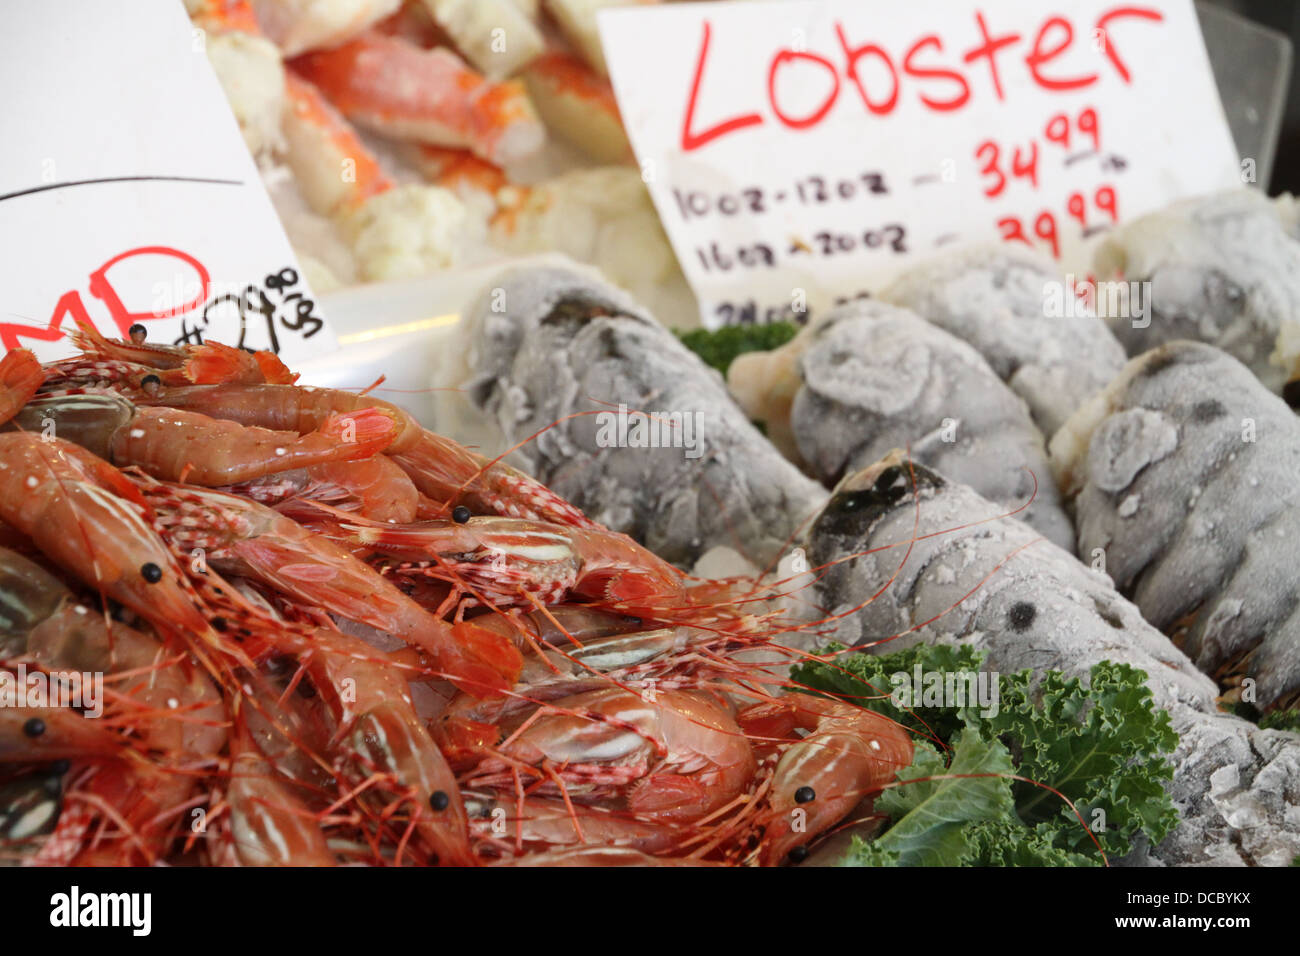 Lobster and shrimp for sale at market. Stock Photo